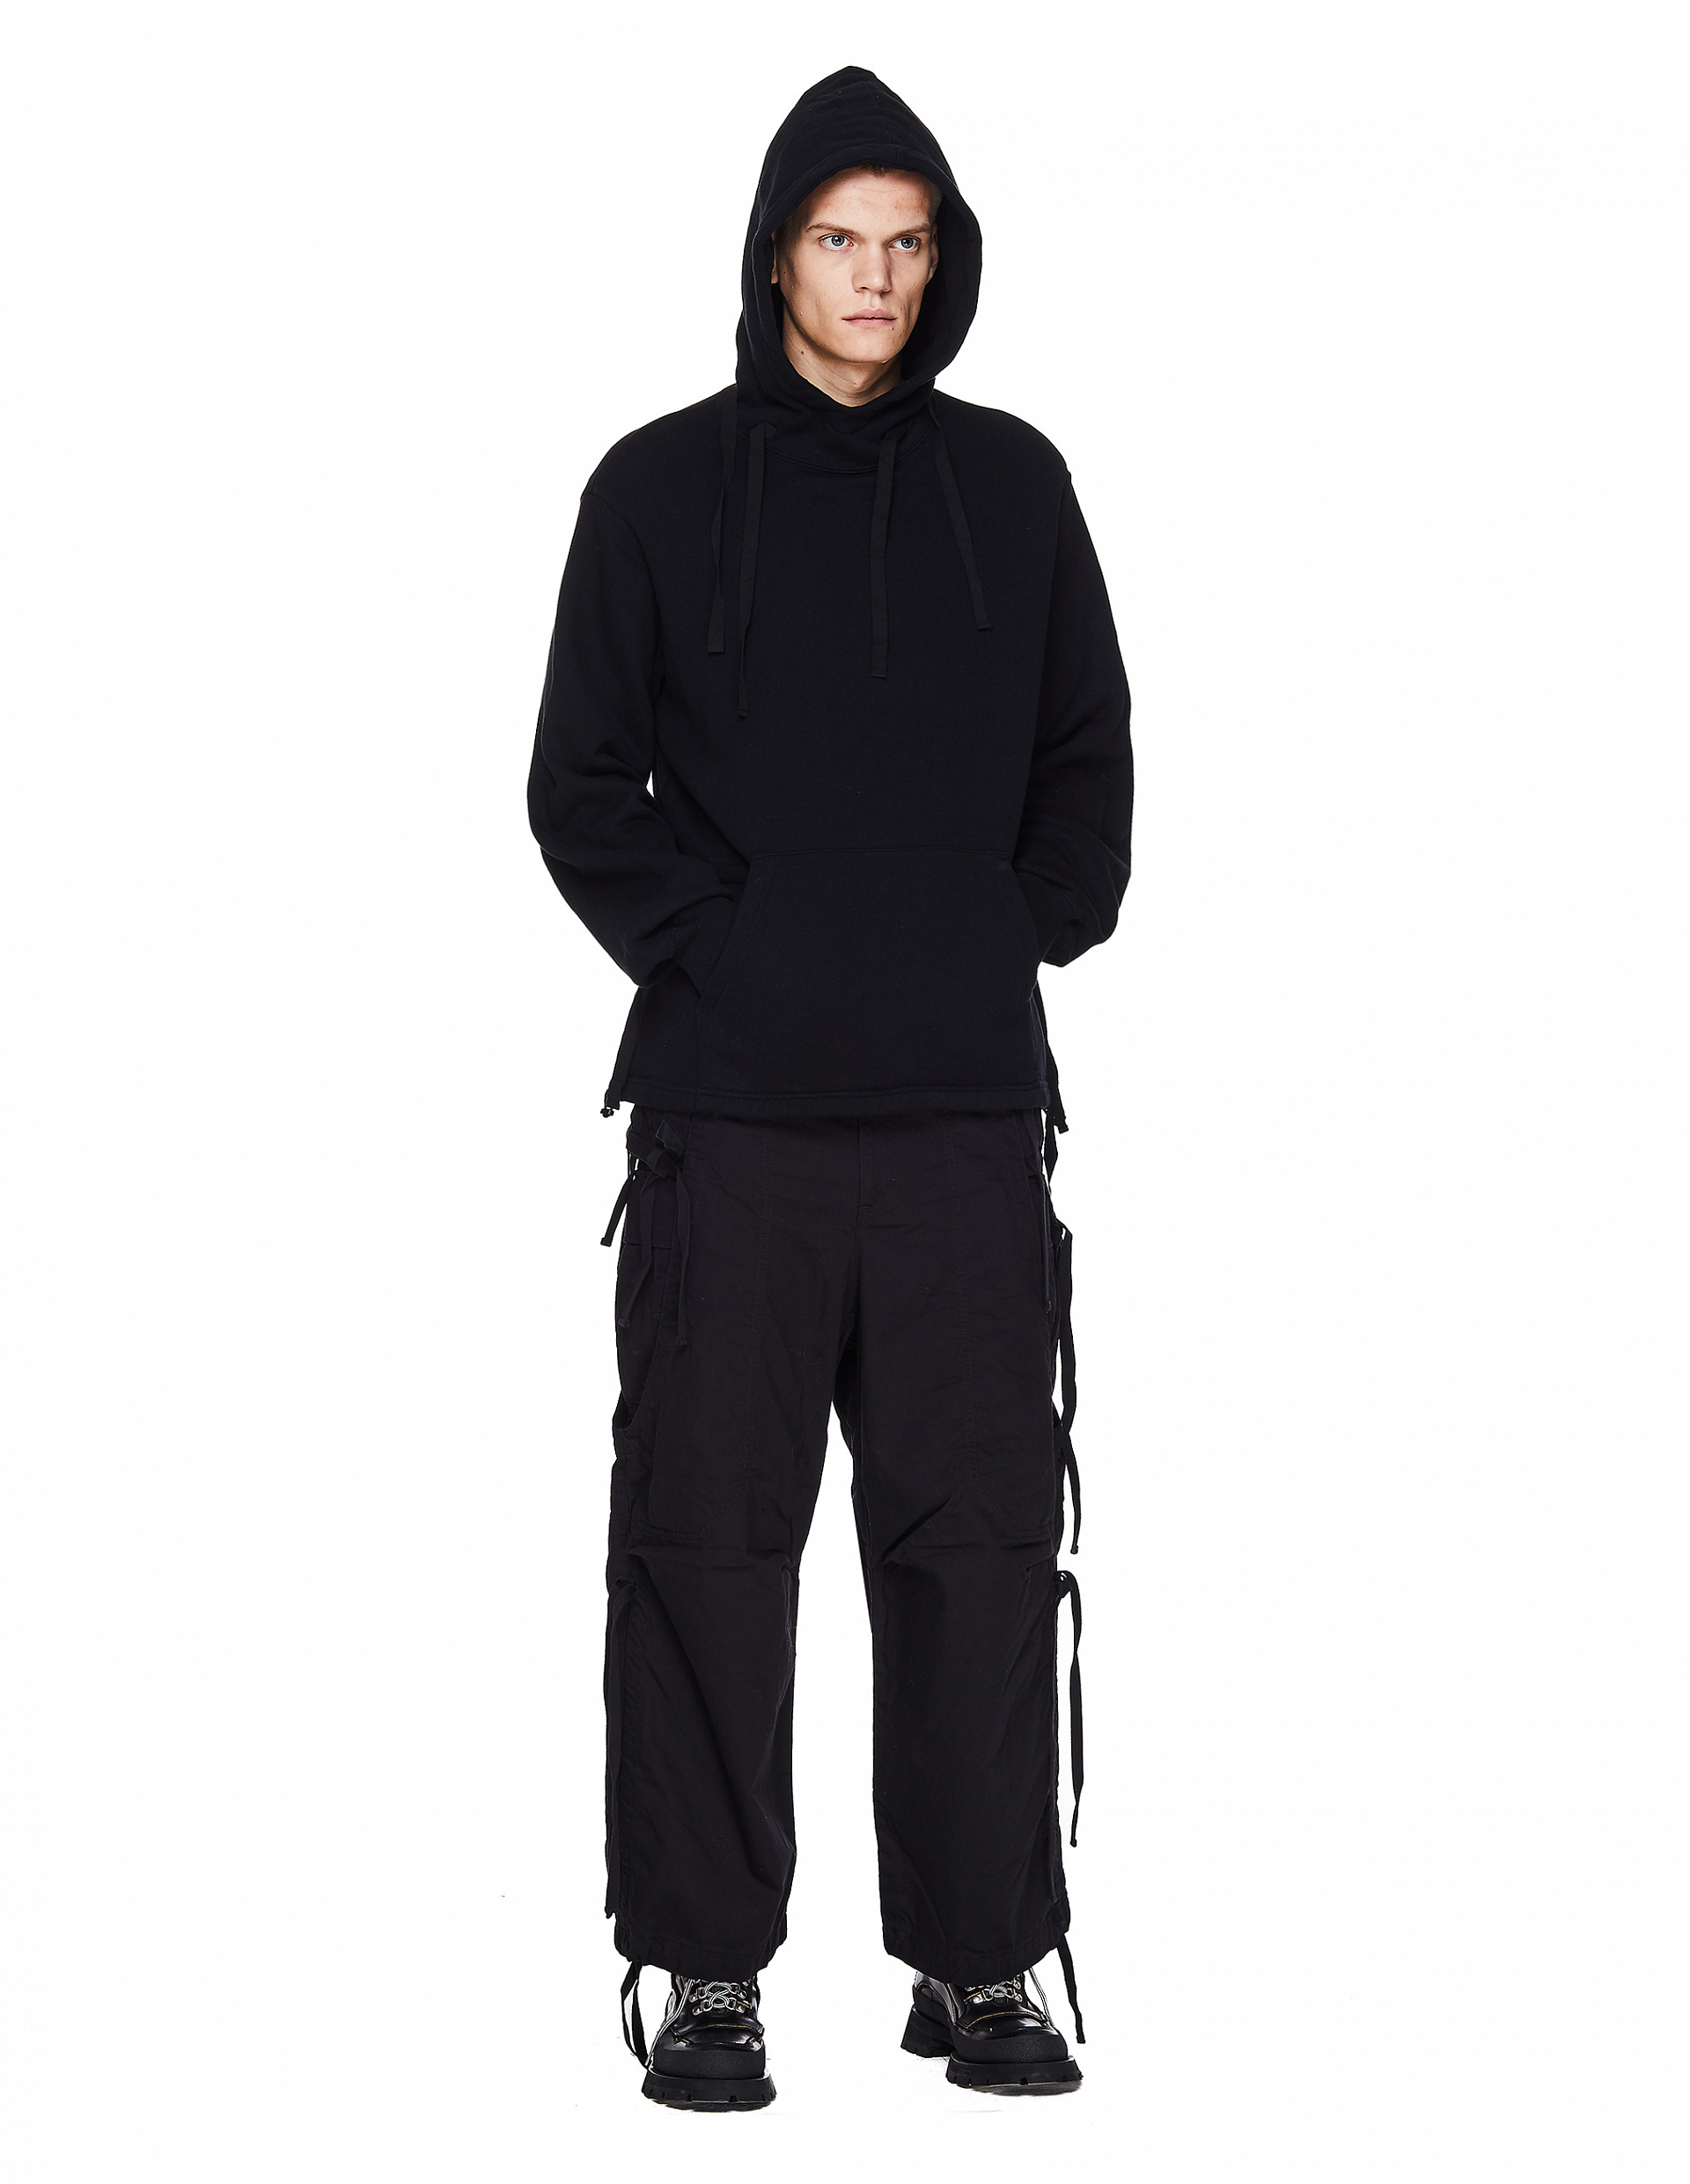 Buy Undercover men black cotton printed hoodie for $298 online on ...